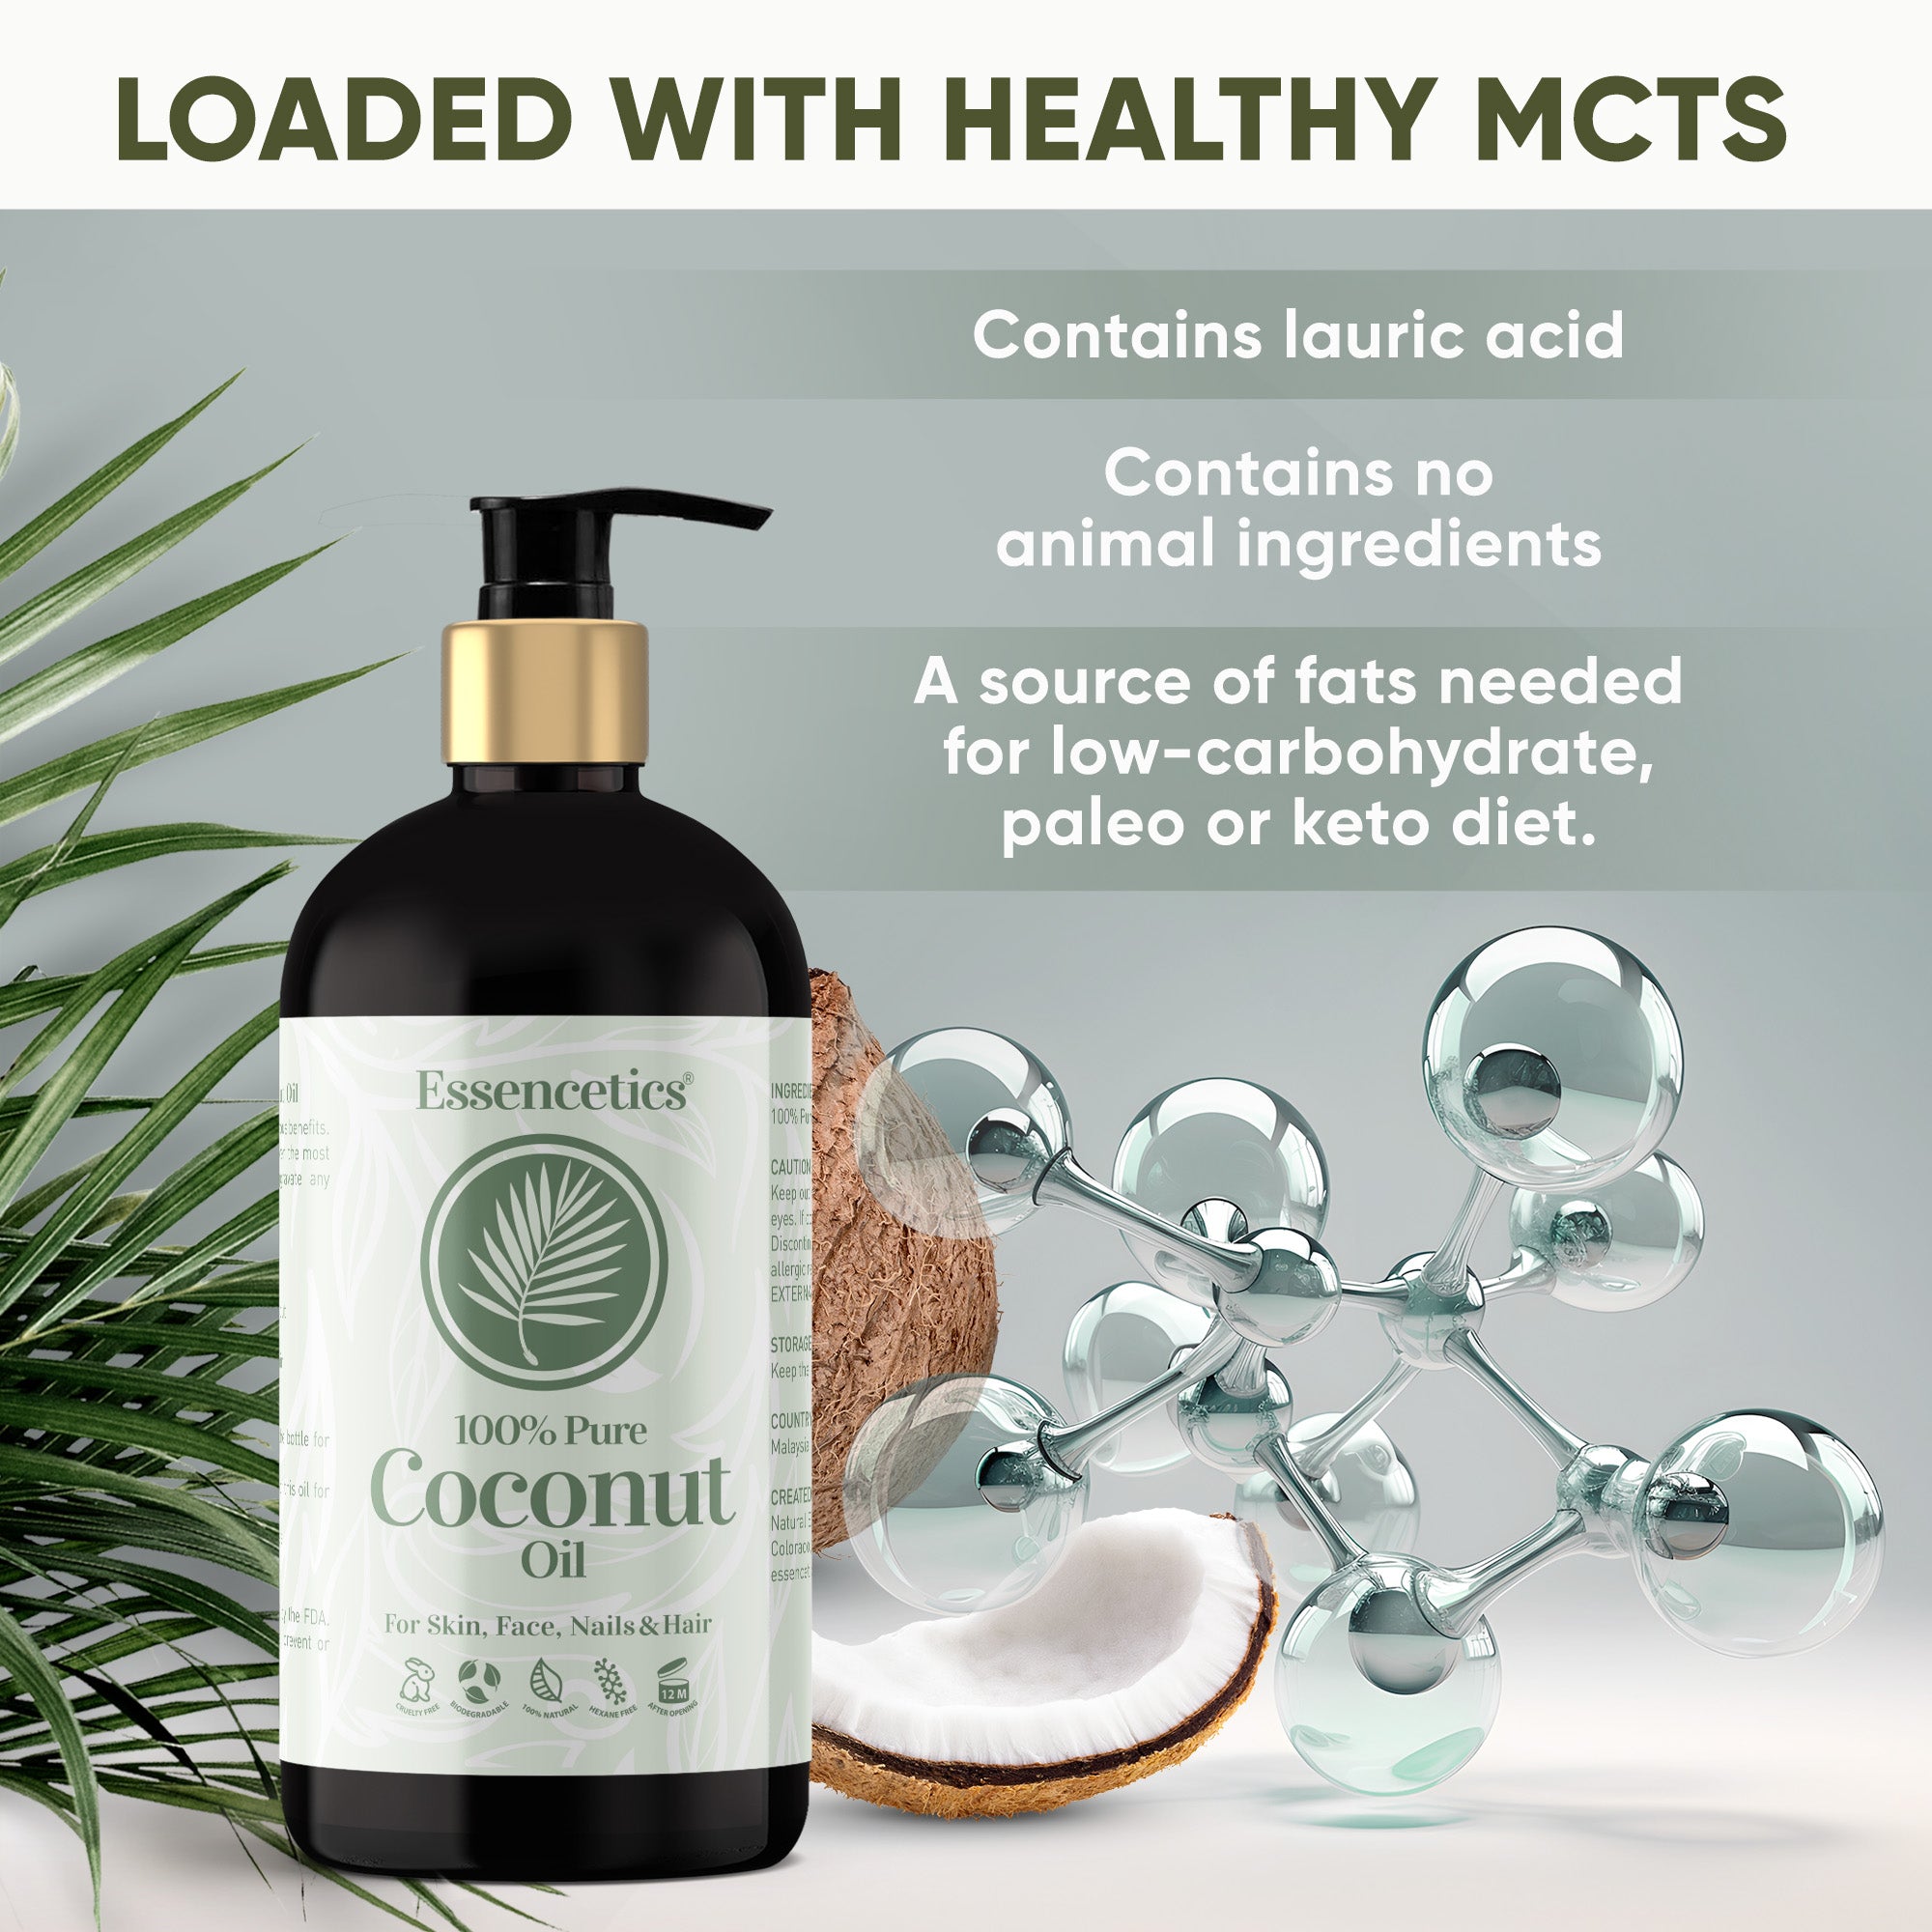 Handcraft Blends Fractionated Coconut Oil - 100% Pure & Natural Premium Therapeutic Grade - Coconut Carrier Oil for Aromatherapy, Massage, Moistur